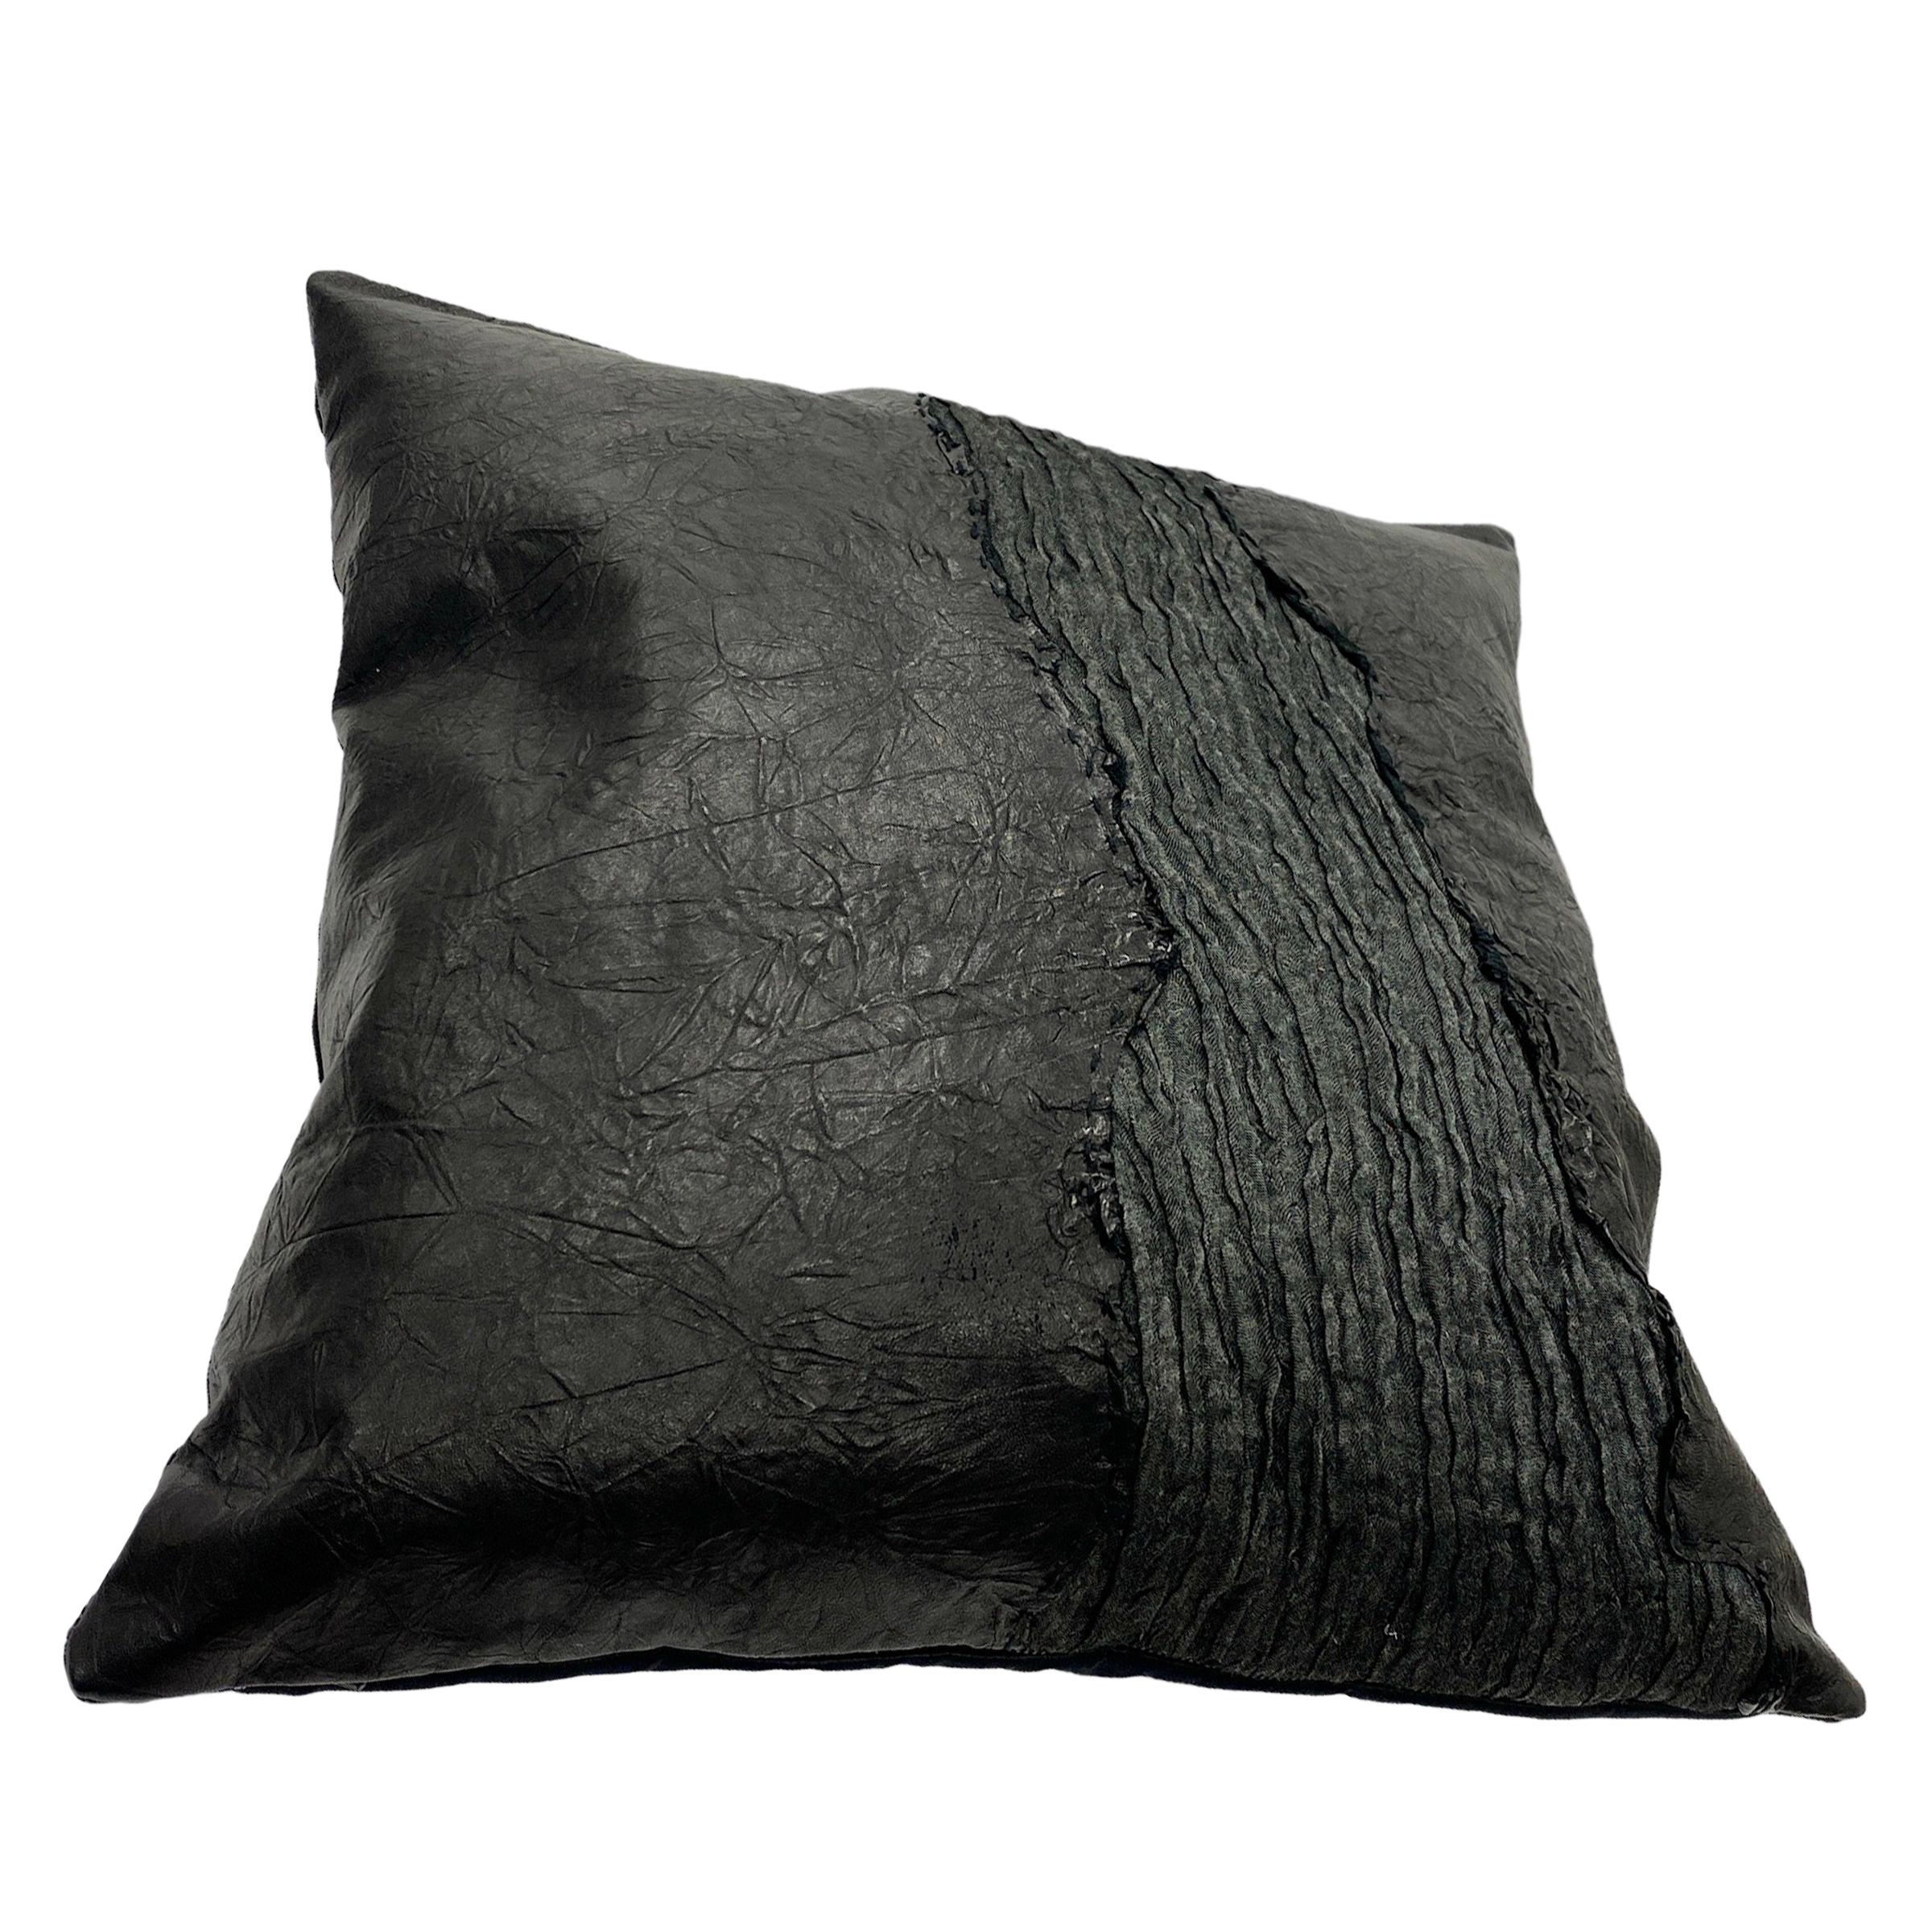 Genuine Wrinkled Black Leather Pillows. Combo 
Authentic Italian wrinkled black leather pillow. combination of black leather and dark gray wrinkled fabric. Has unique Gothic look. hand-crofted.  This gives a perfect softness and sheen to the